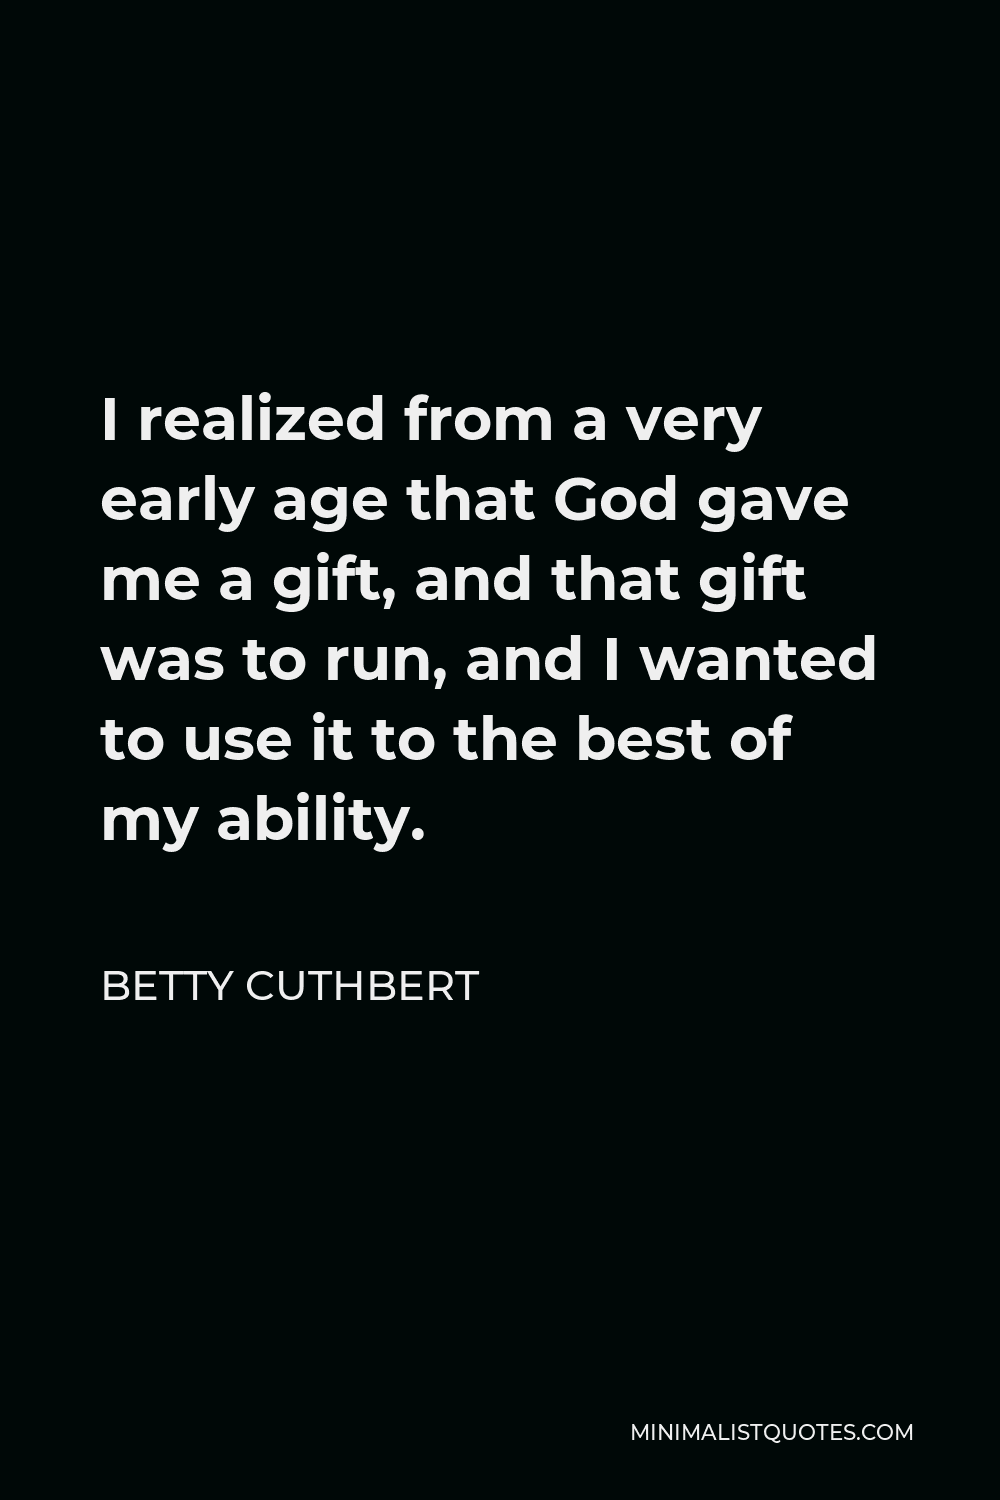 Betty Cuthbert Quote - I realized from a very early age that God gave me a gift, and that gift was to run, and I wanted to use it to the best of my ability.